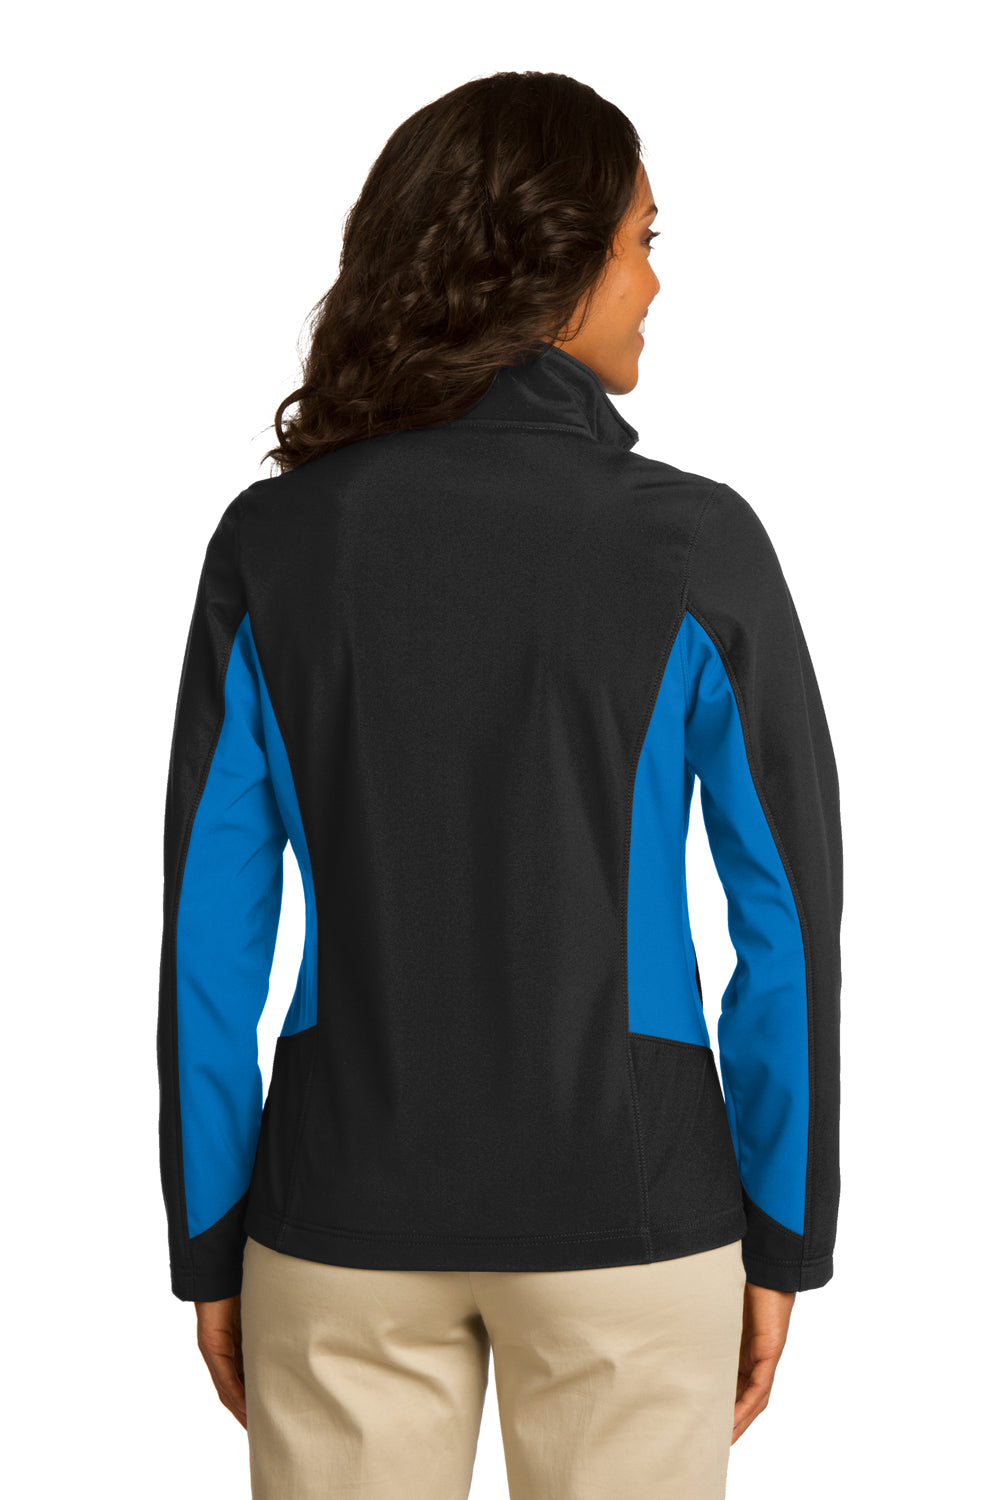 Port Authority L318 Womens Core Wind & Water Resistant Full Zip Jacket Black/Royal Blue Back